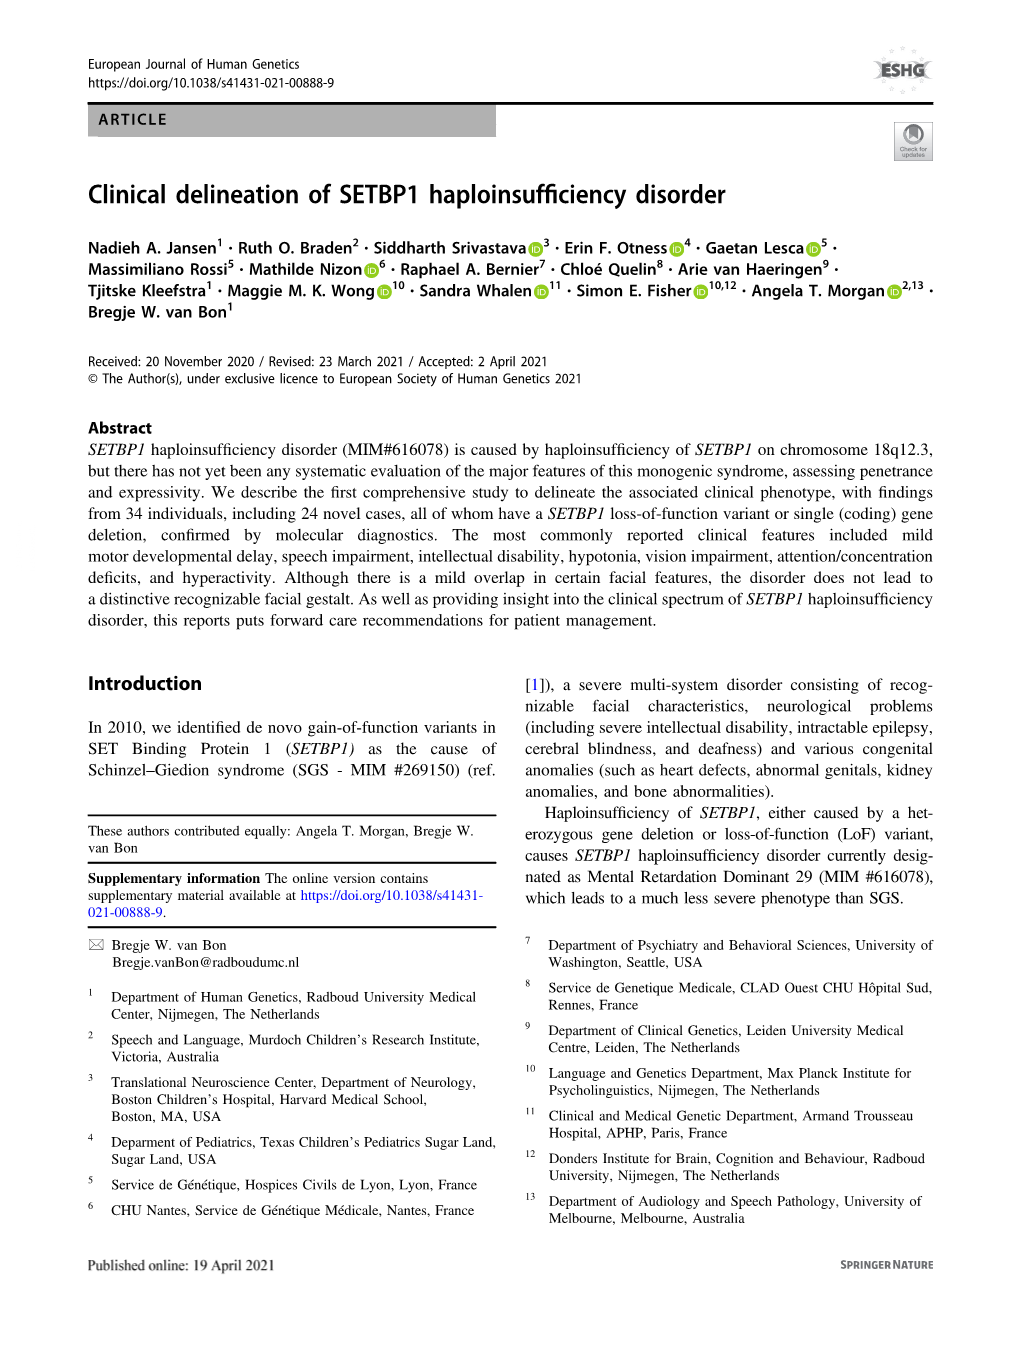 Clinical Delineation of SETBP1 Haploinsufficiency Disorder